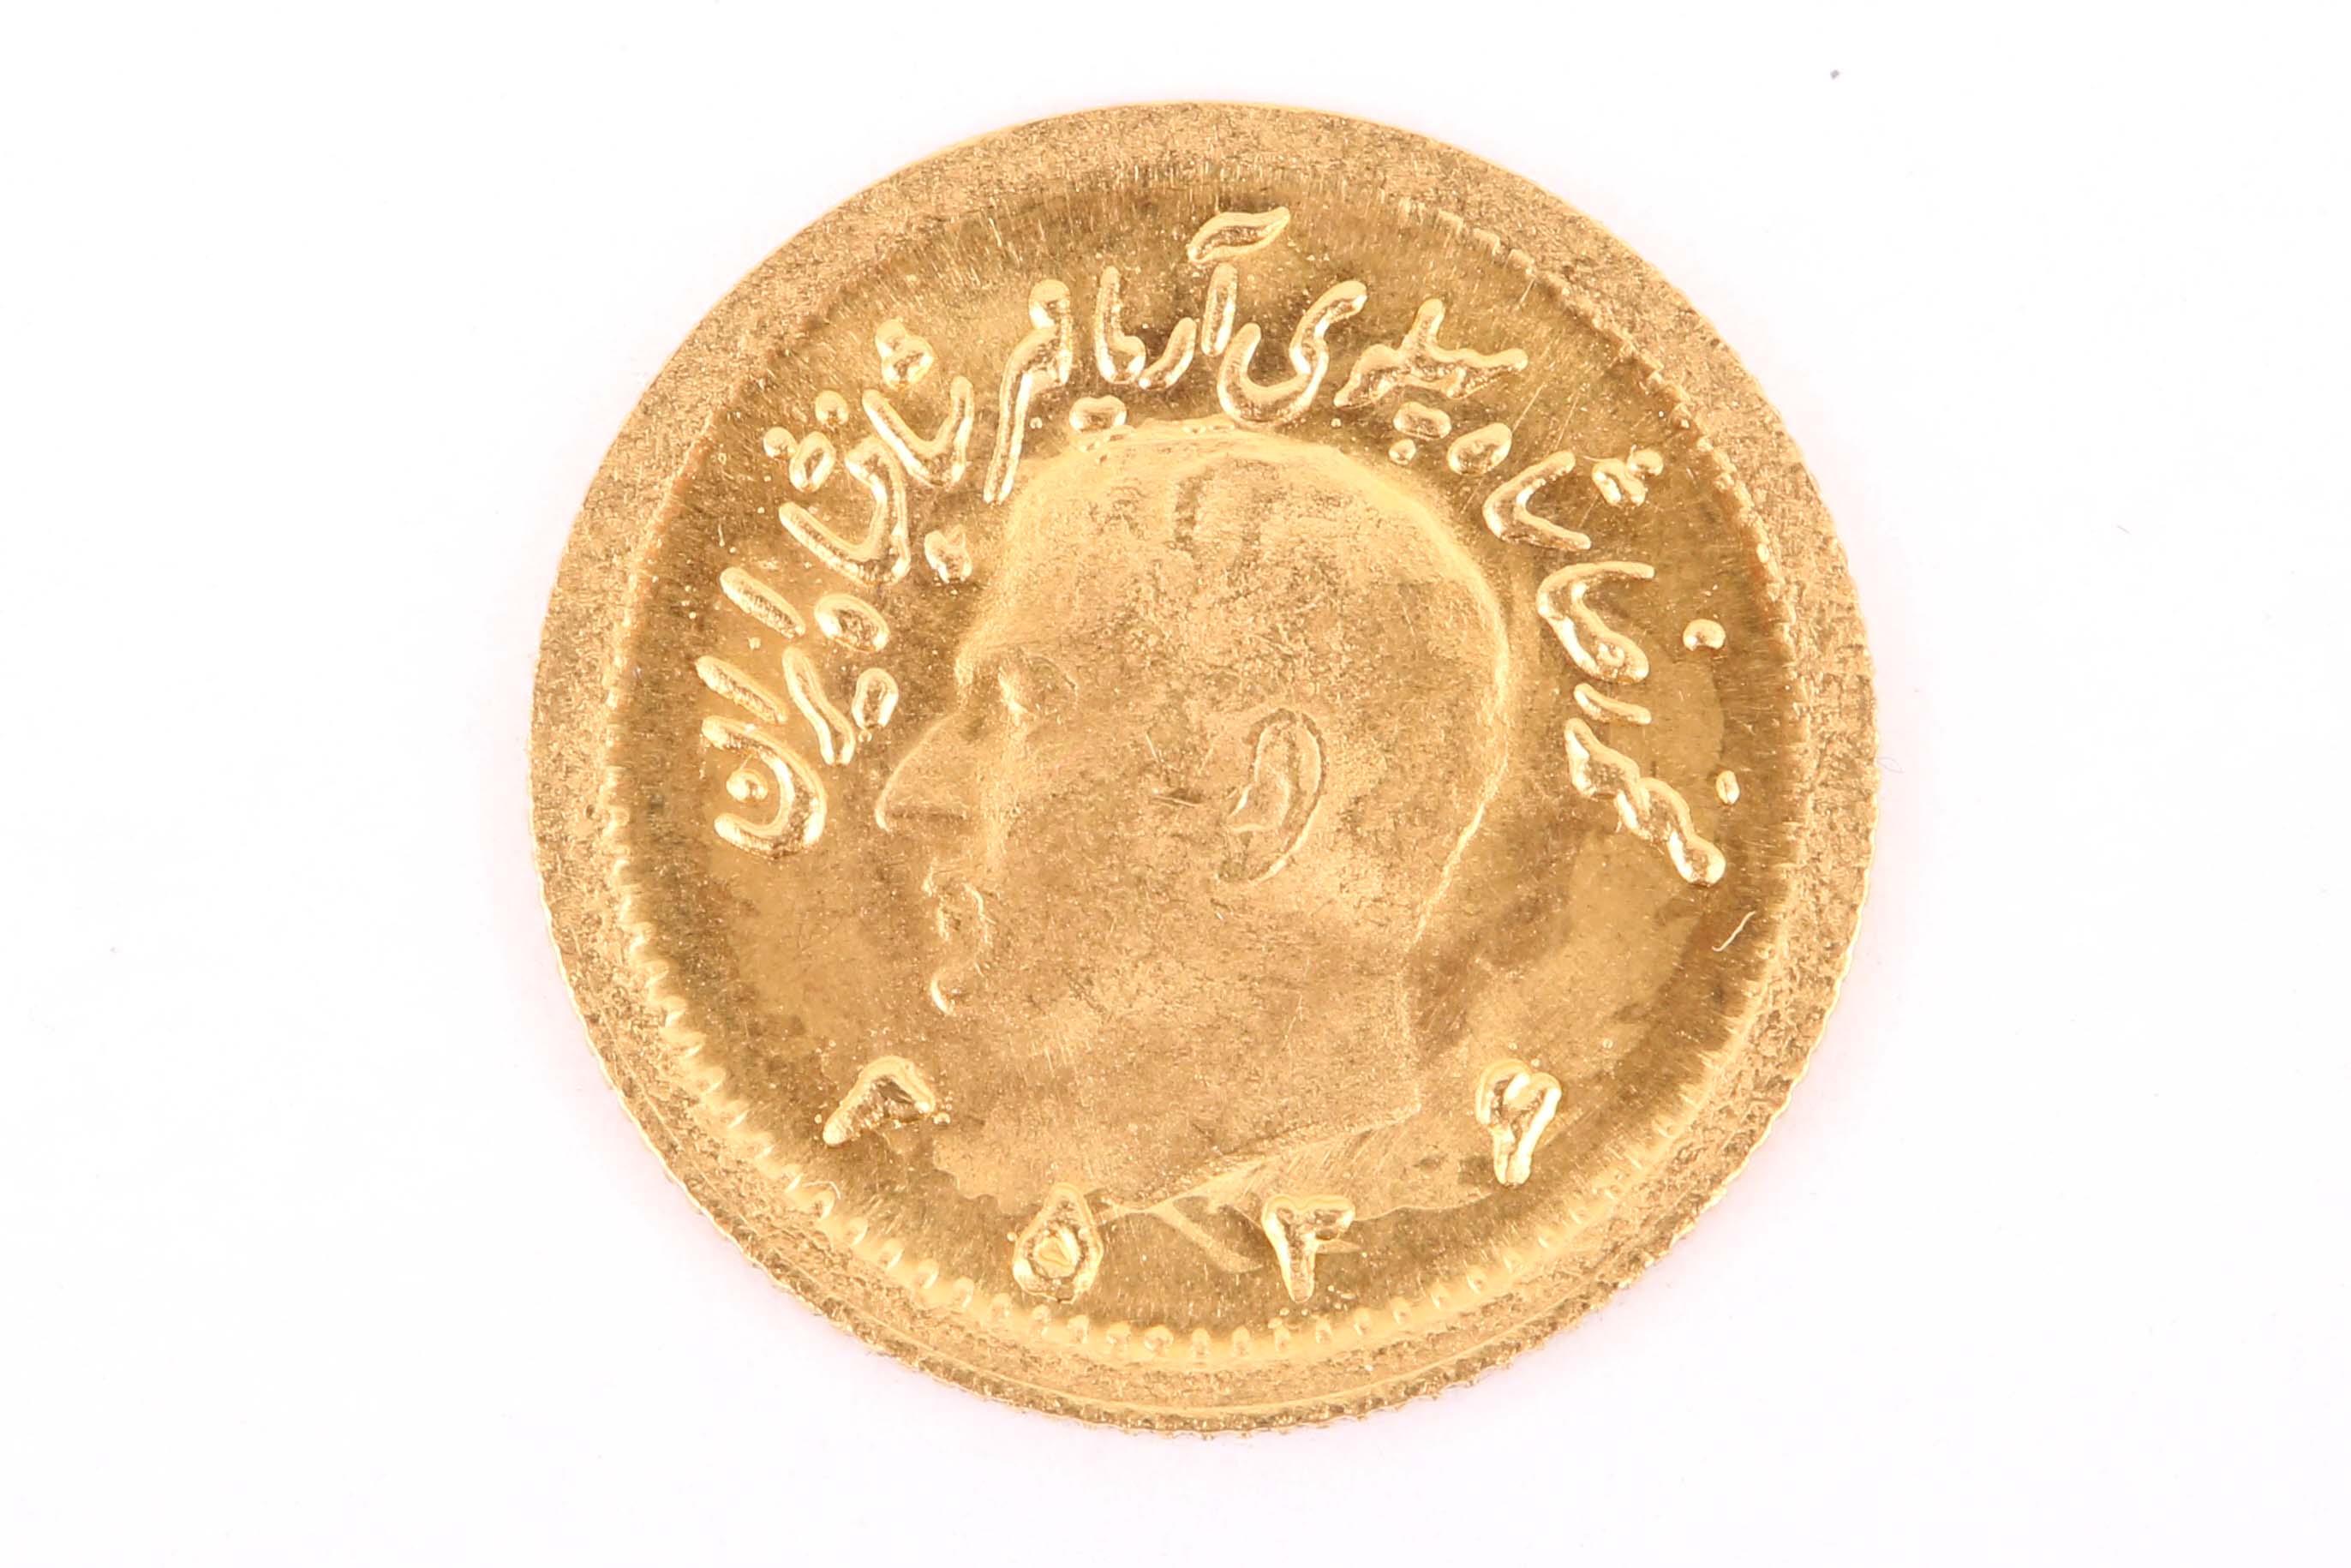 A 1970's Iranian high carat gold quarter sovereign shaped commemorative coin, depicting profile of